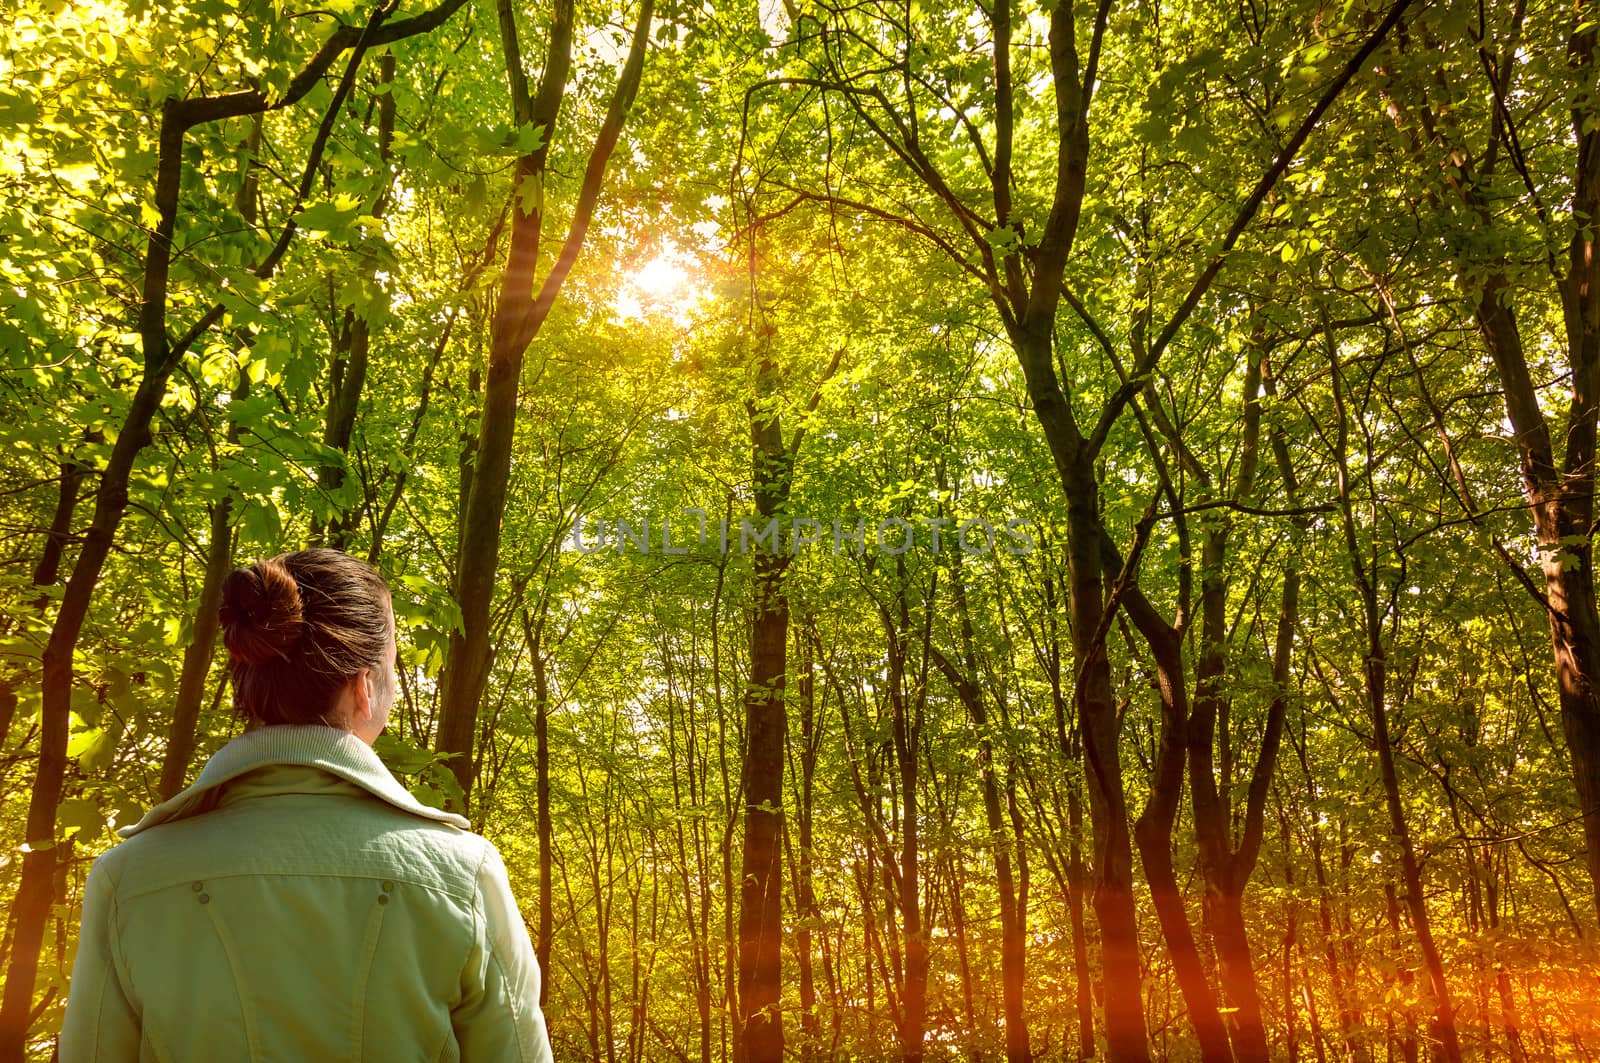 A woman lightened by the sun rays through the tree in a deep forest